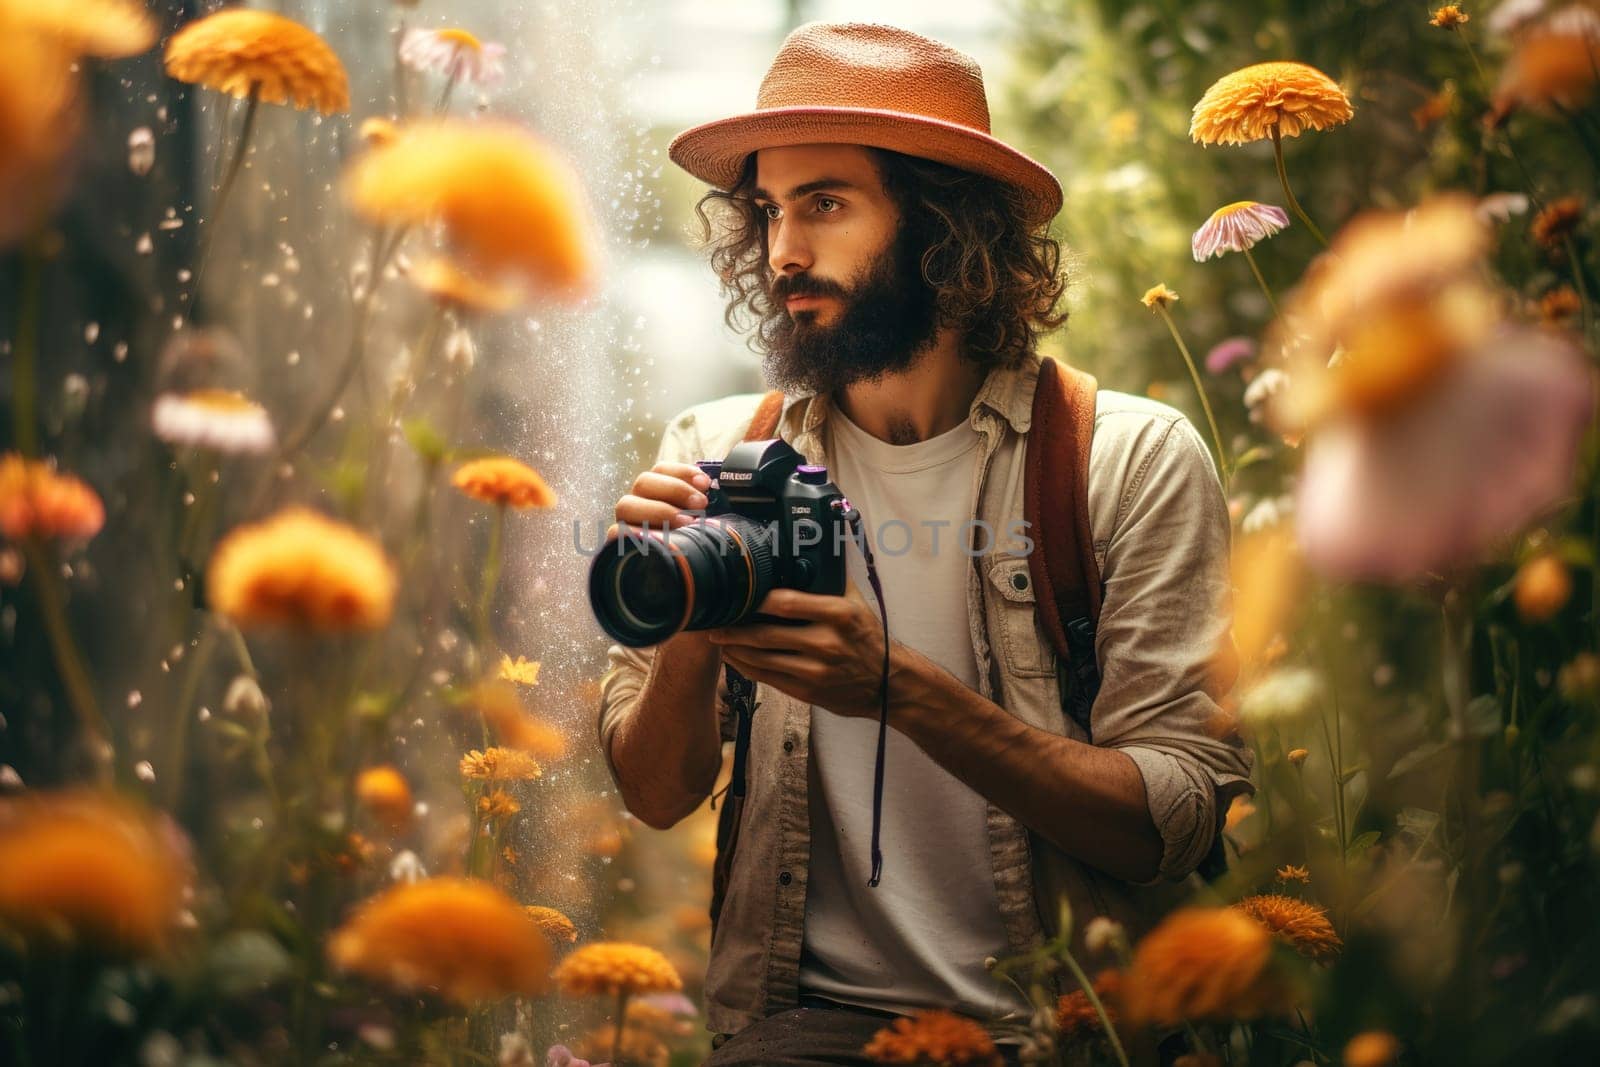 A man with a beard photographs flowers with a camera in the forest. by Yurich32